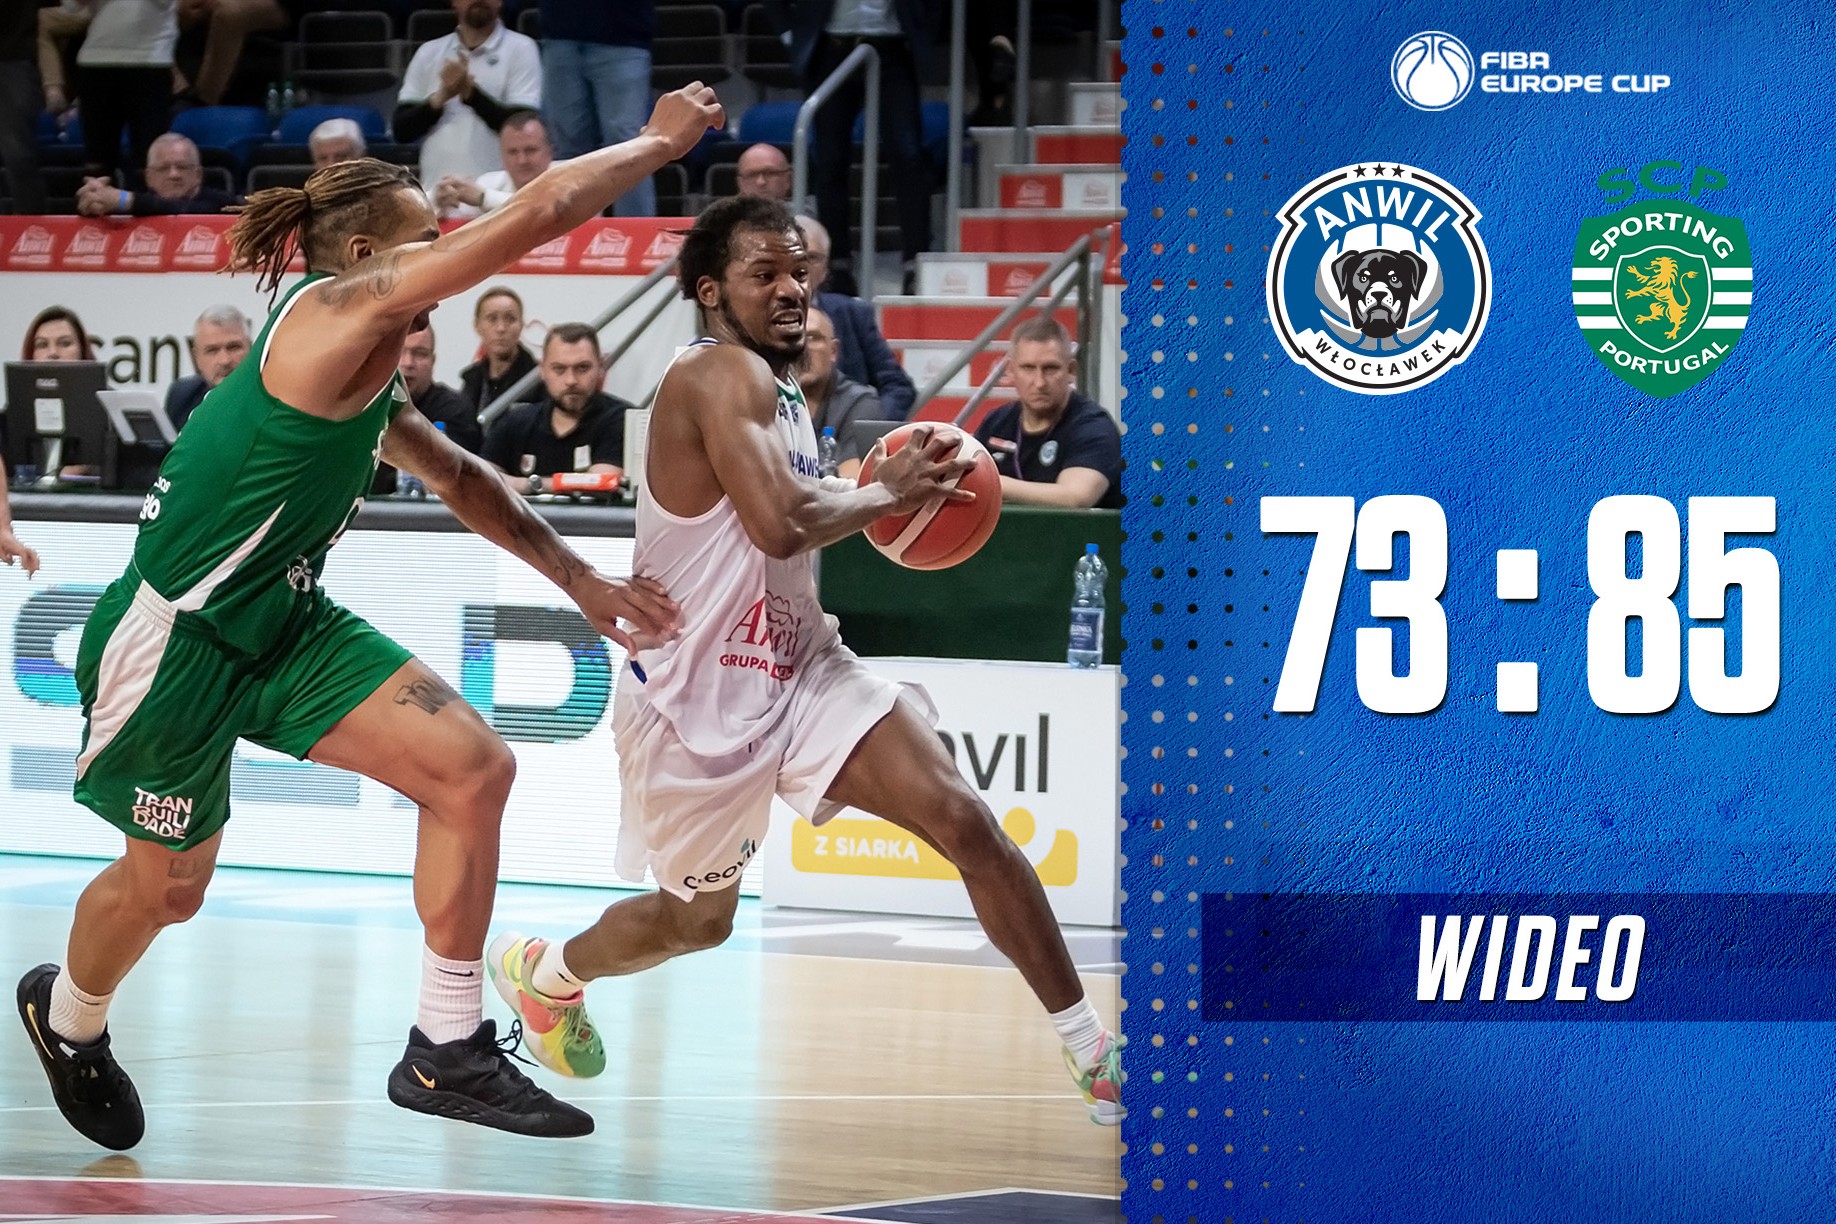 WIDEO | Anwil - Sporting CP